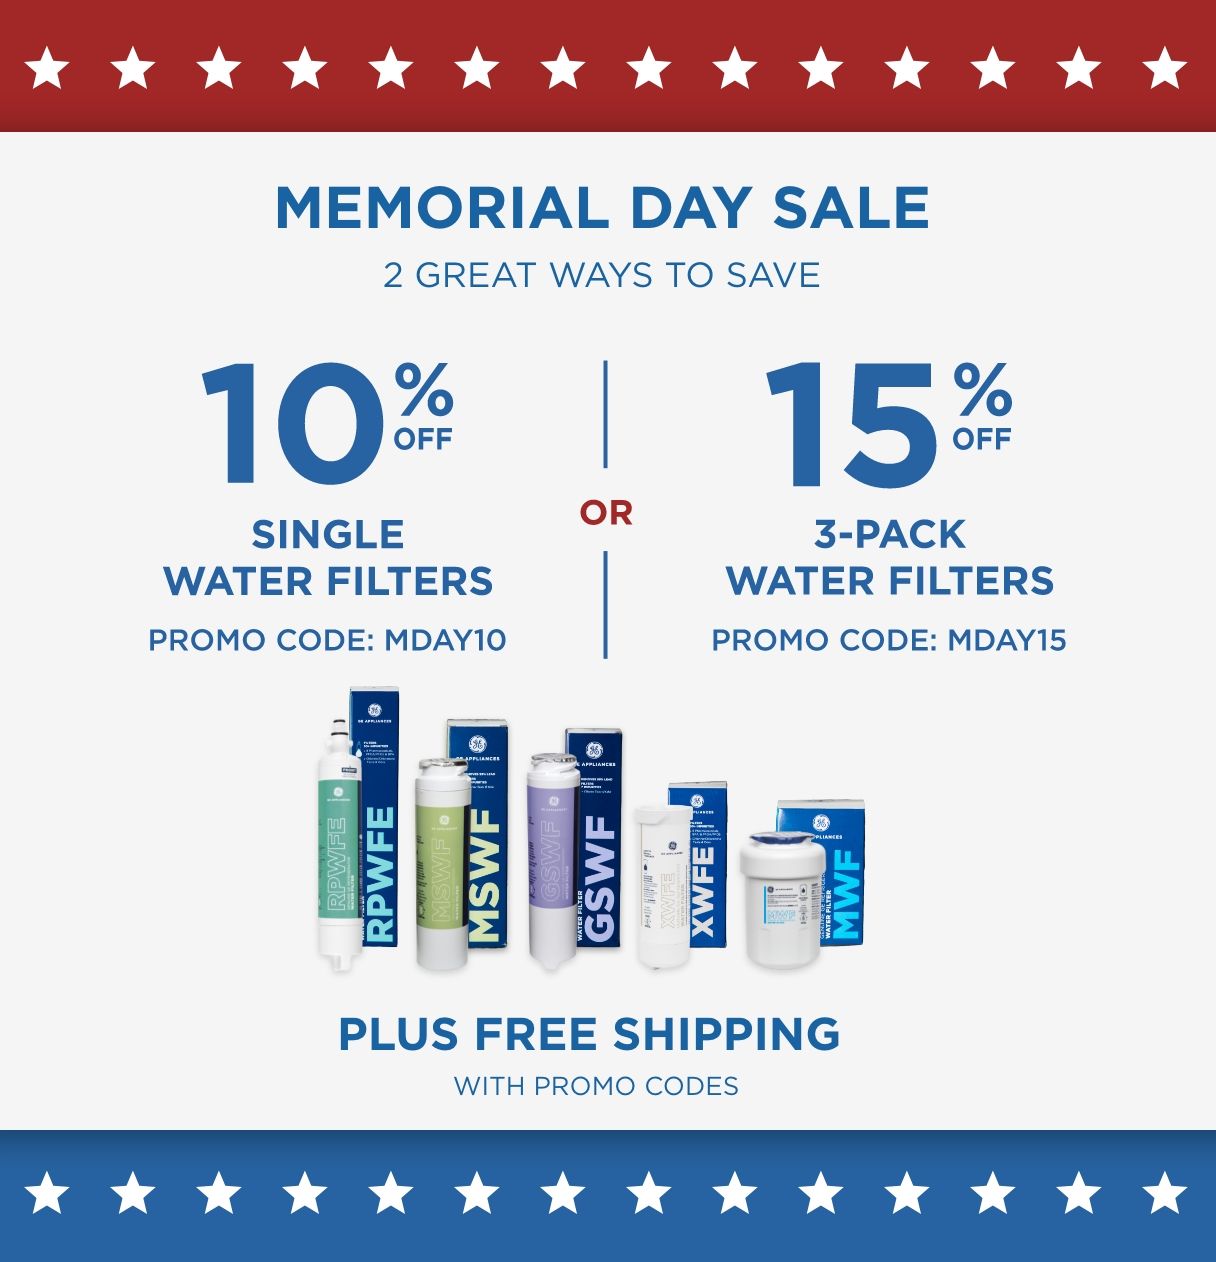 Save 10% Off Single Filters or 15% 3-Pack plus Free Shipping with promo codes